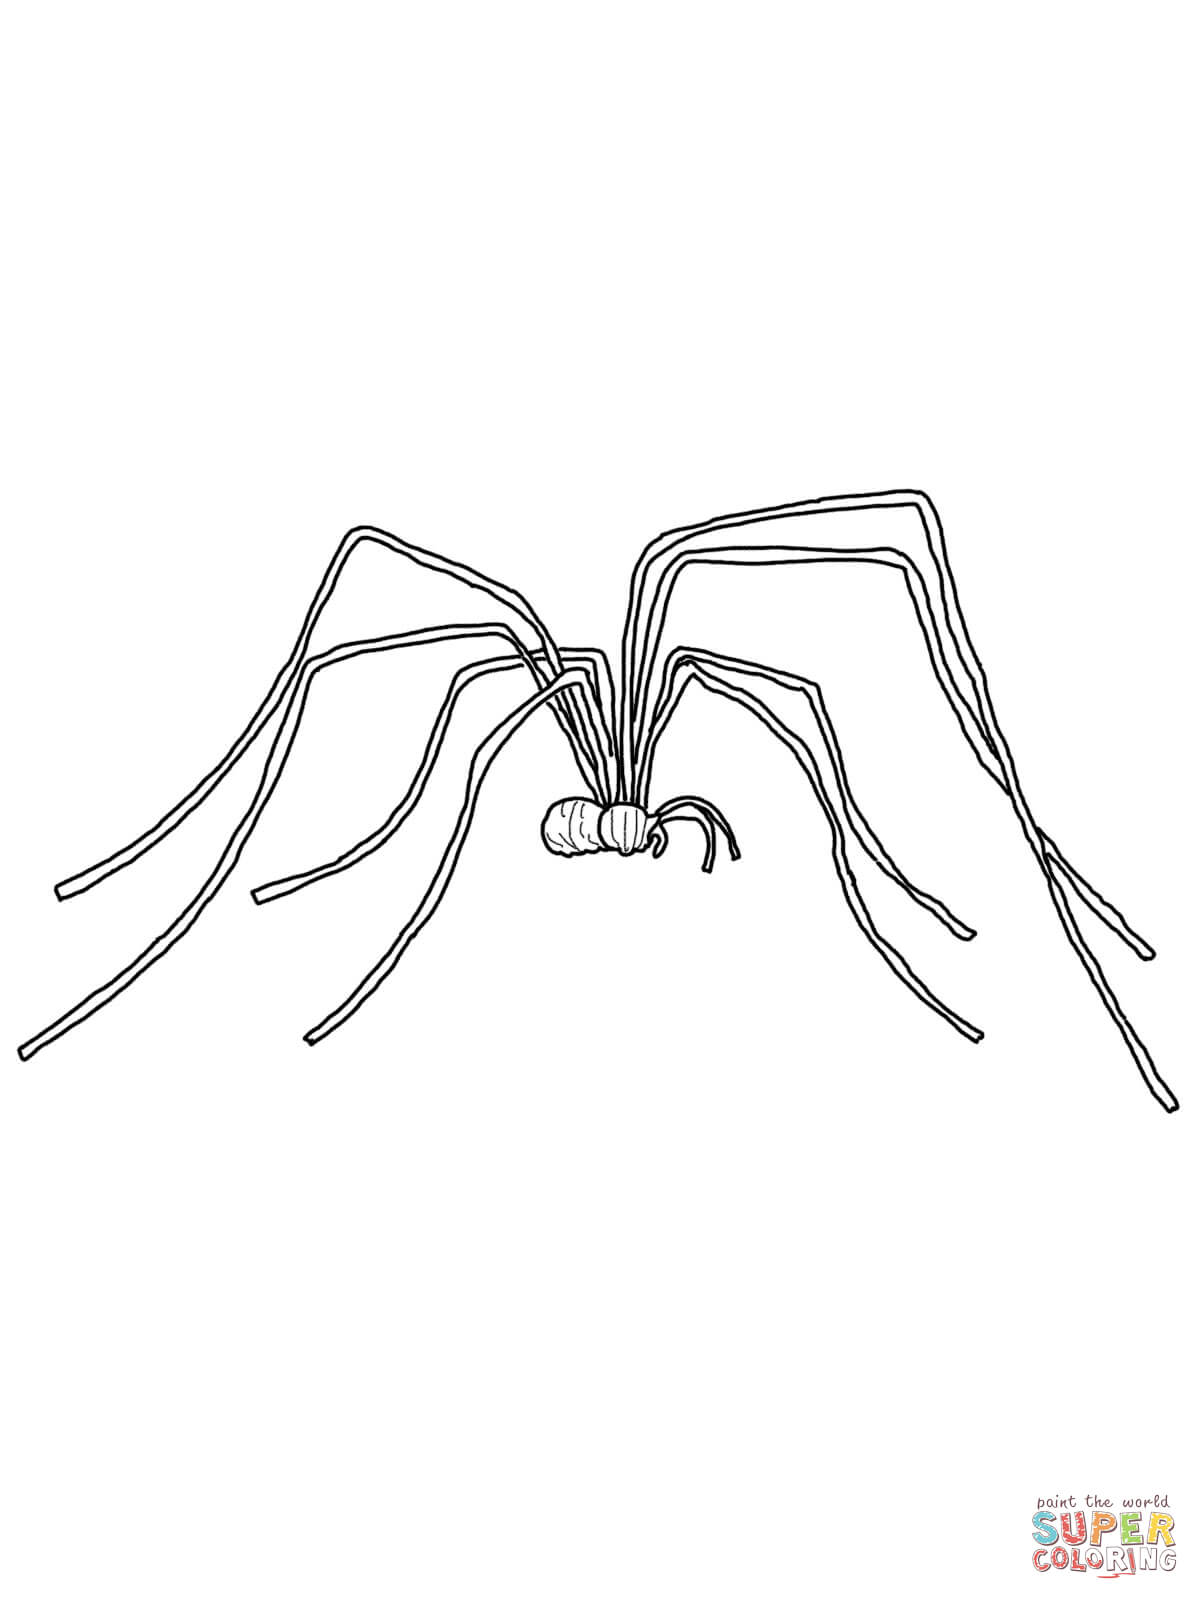 Daddy long legs coloring page free printable coloring pages